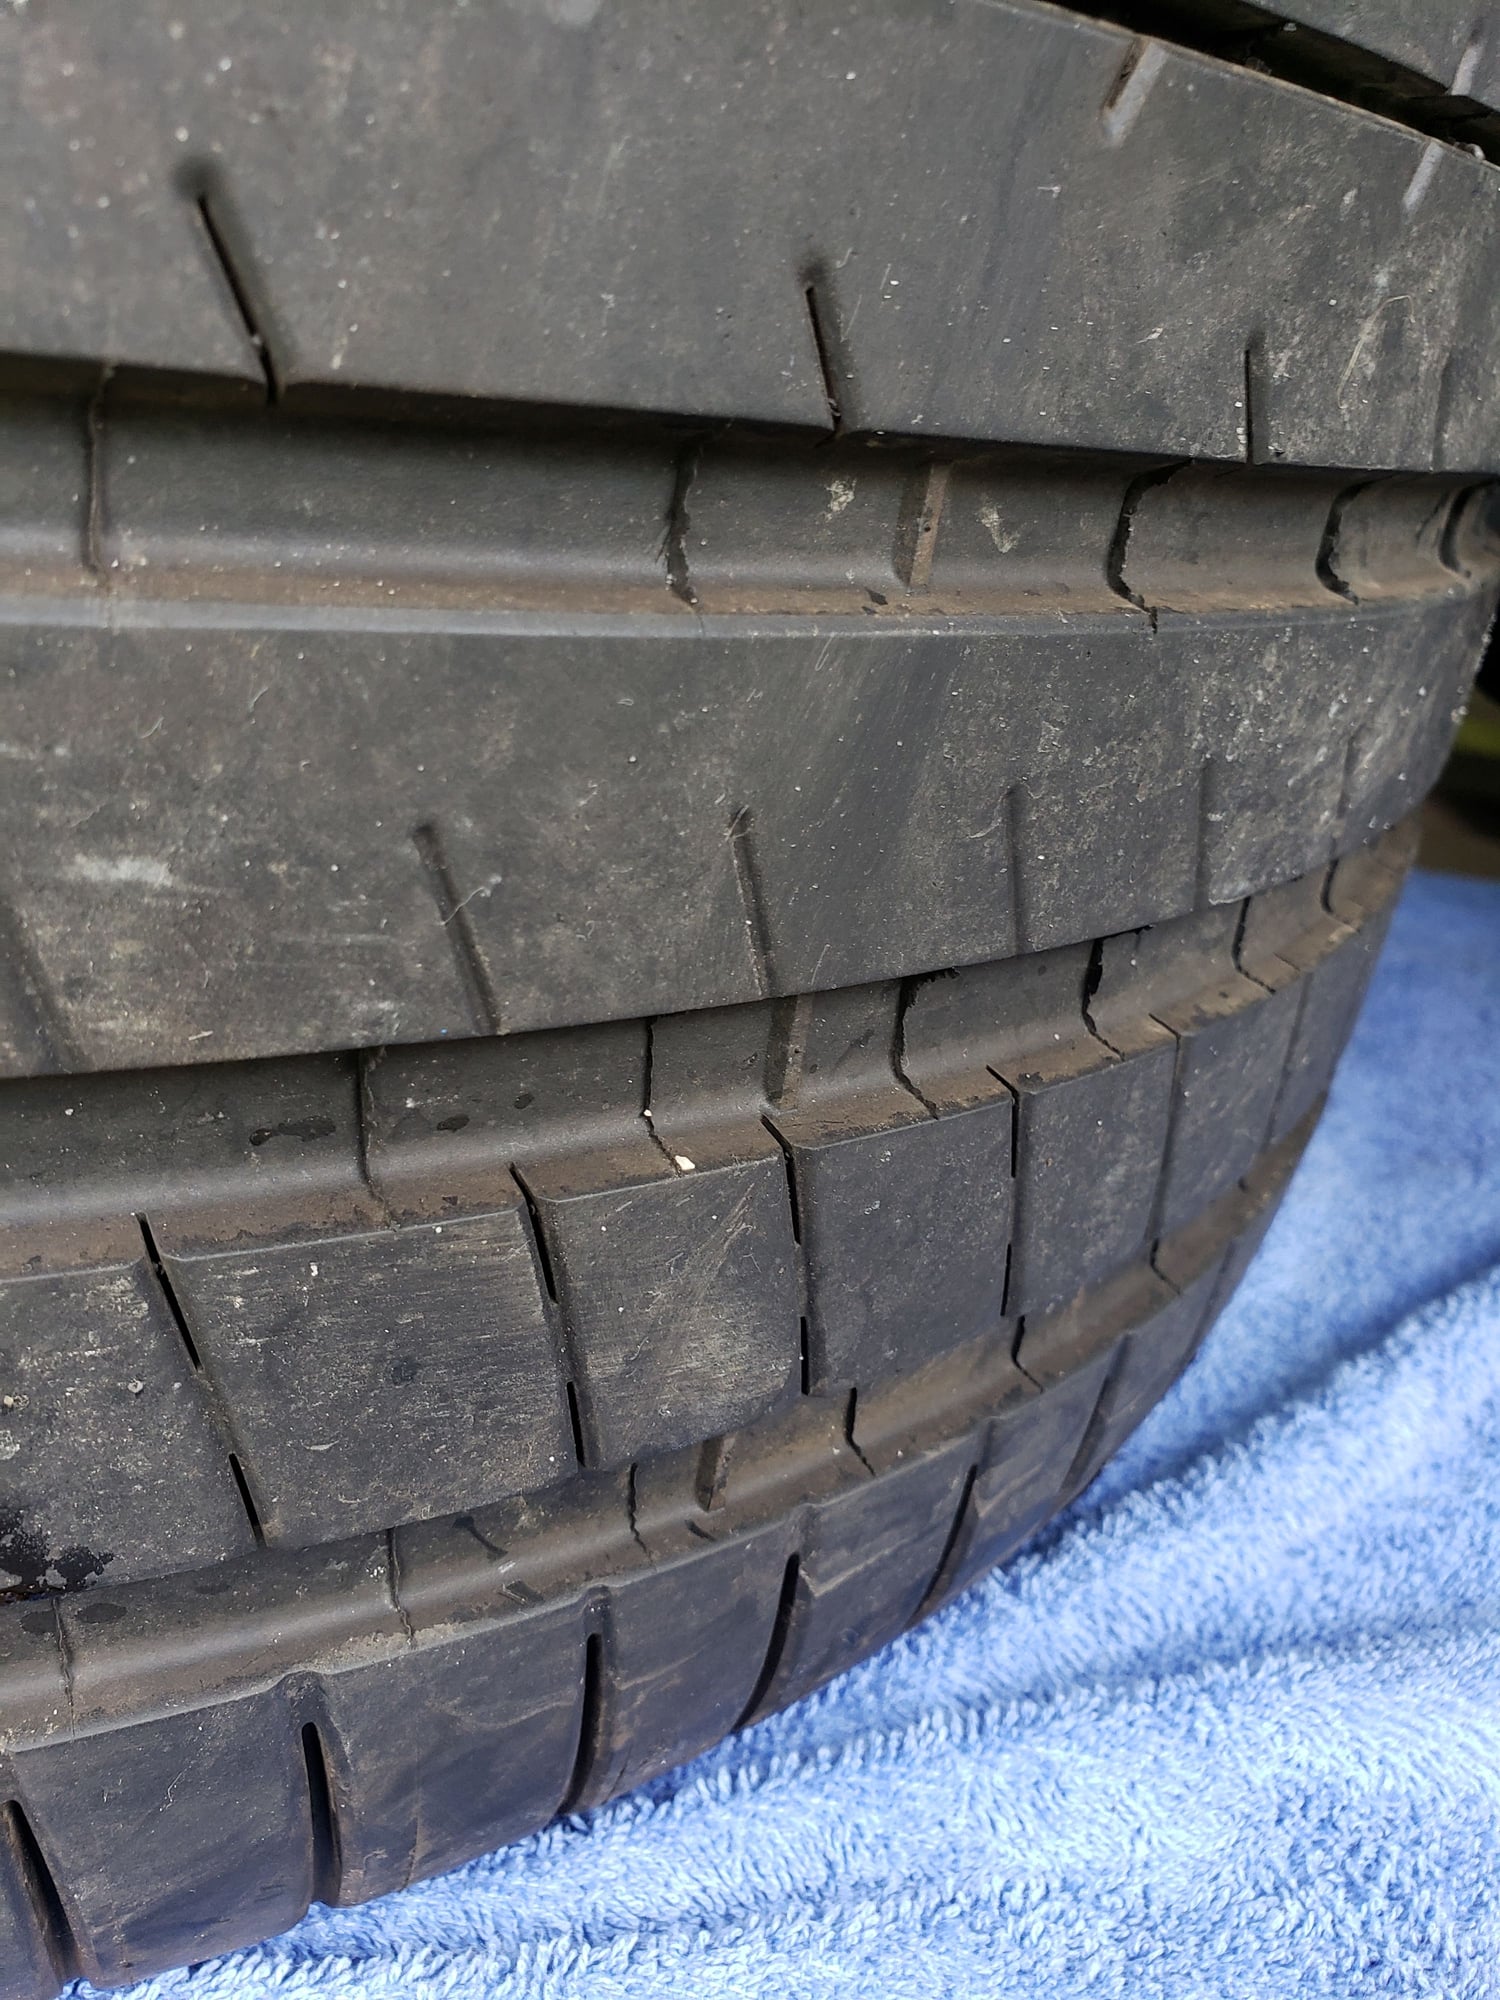 Wheels and Tires/Axles - 2 Tires, Michelin Pilot Super Sport 275x40_18 - Used - 0  All Models - Ocala, FL 34482, United States